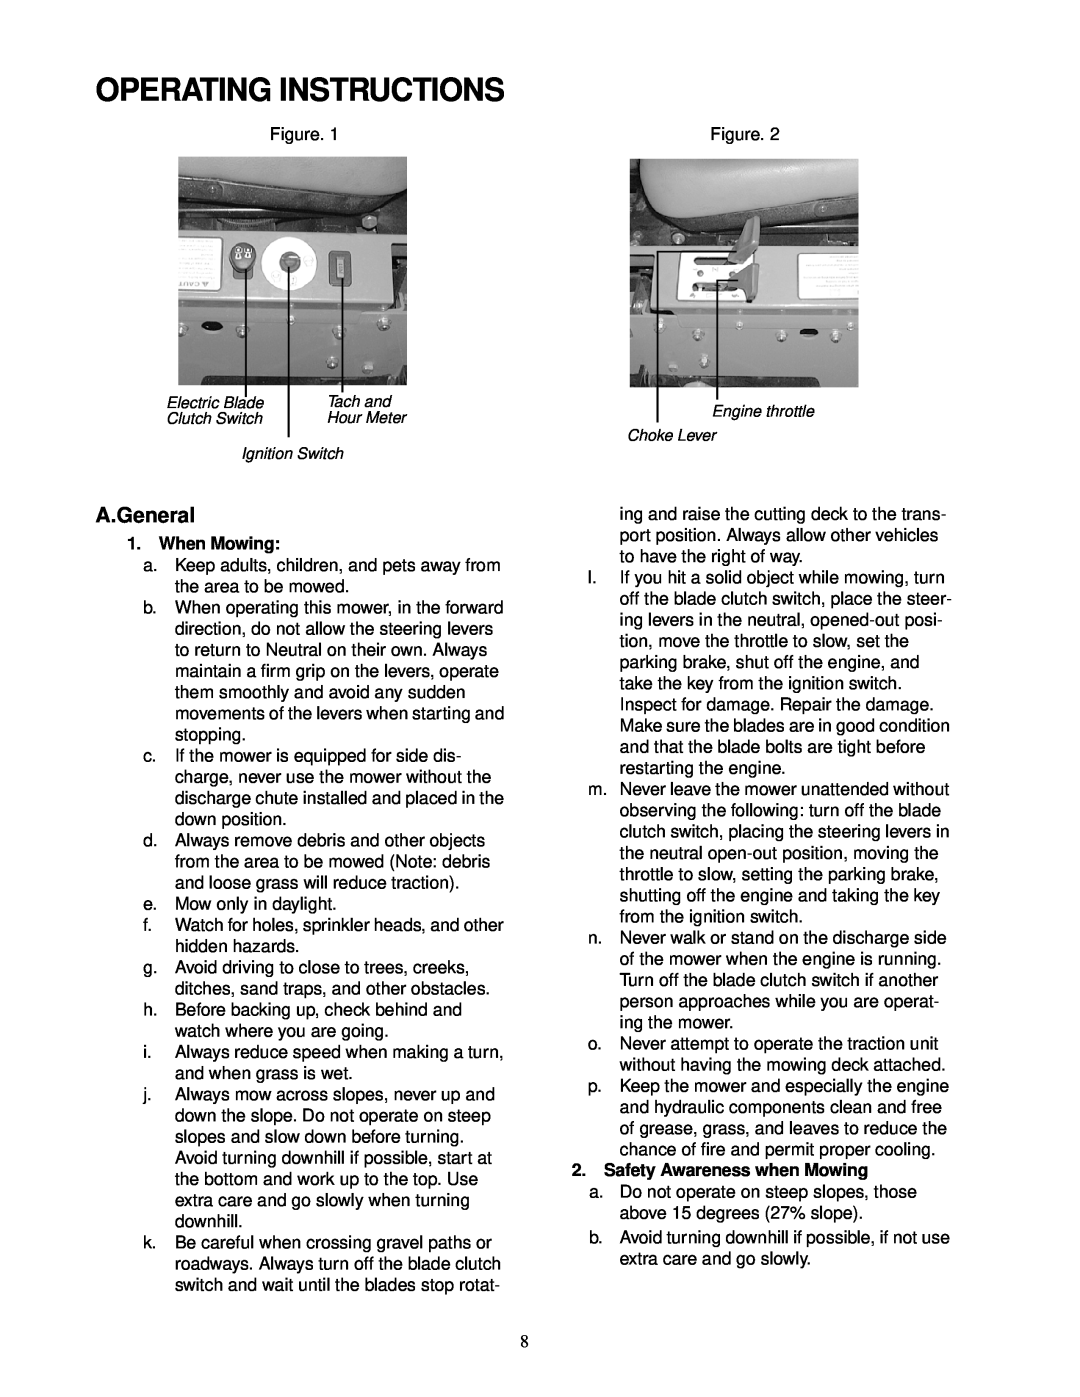 MTD 18HP service manual Operating Instructions, A.General, When Mowing, Safety Awareness when Mowing 